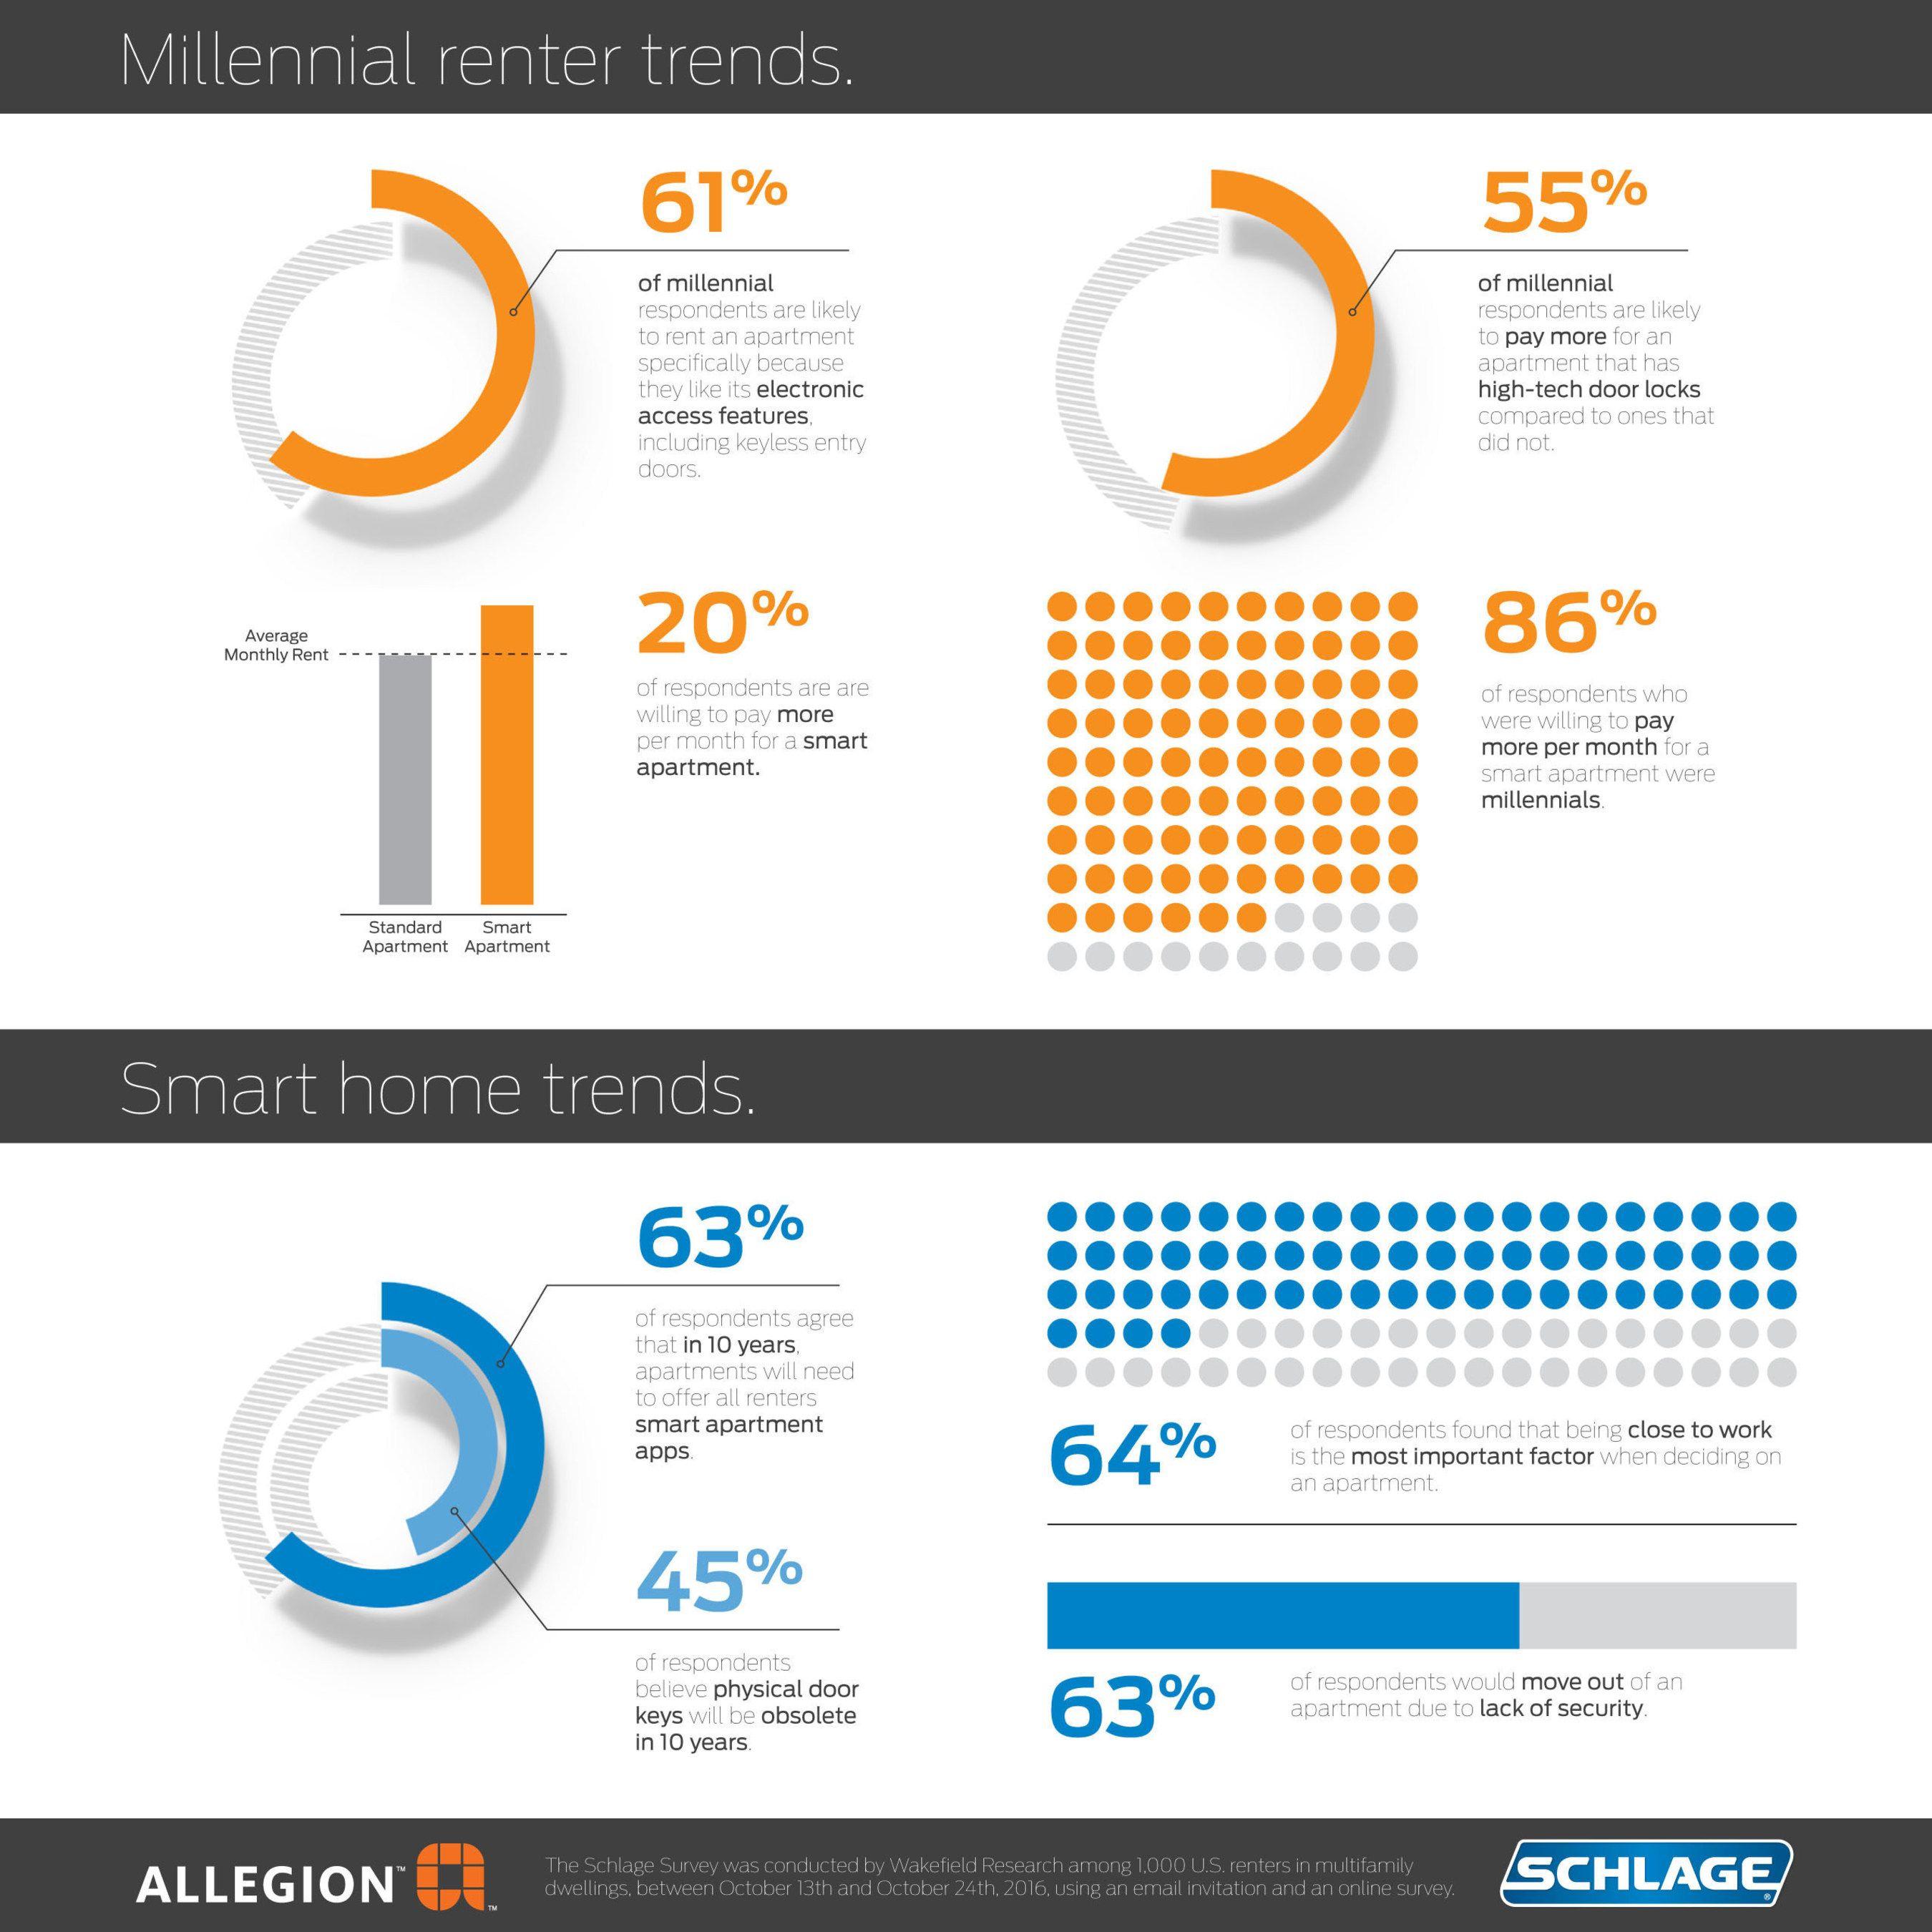 Schlage Logo - Results of Schlage's Industry Insight Survey Reveals What Millennial